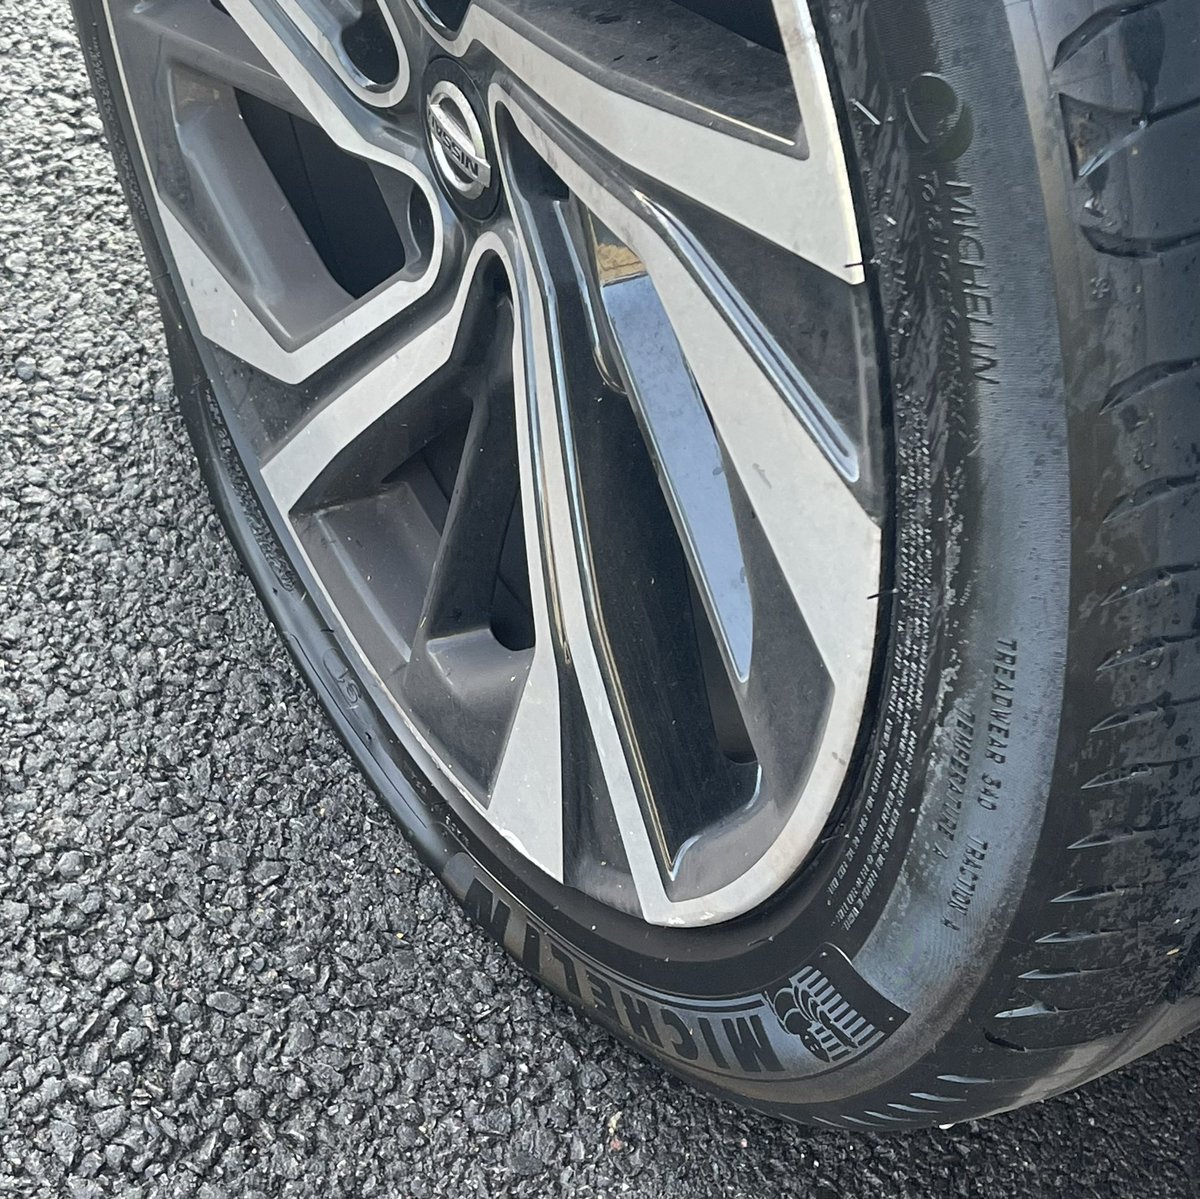 #Nissan #RAC Contacted the RAC at 9am for help with a tire puncture, I’m still waiting…ridiculous service. Help not expected until 8-10pm now! 12 hrs wait for assistance! No point getting the Nissan RAC cover! An entire day wasted.